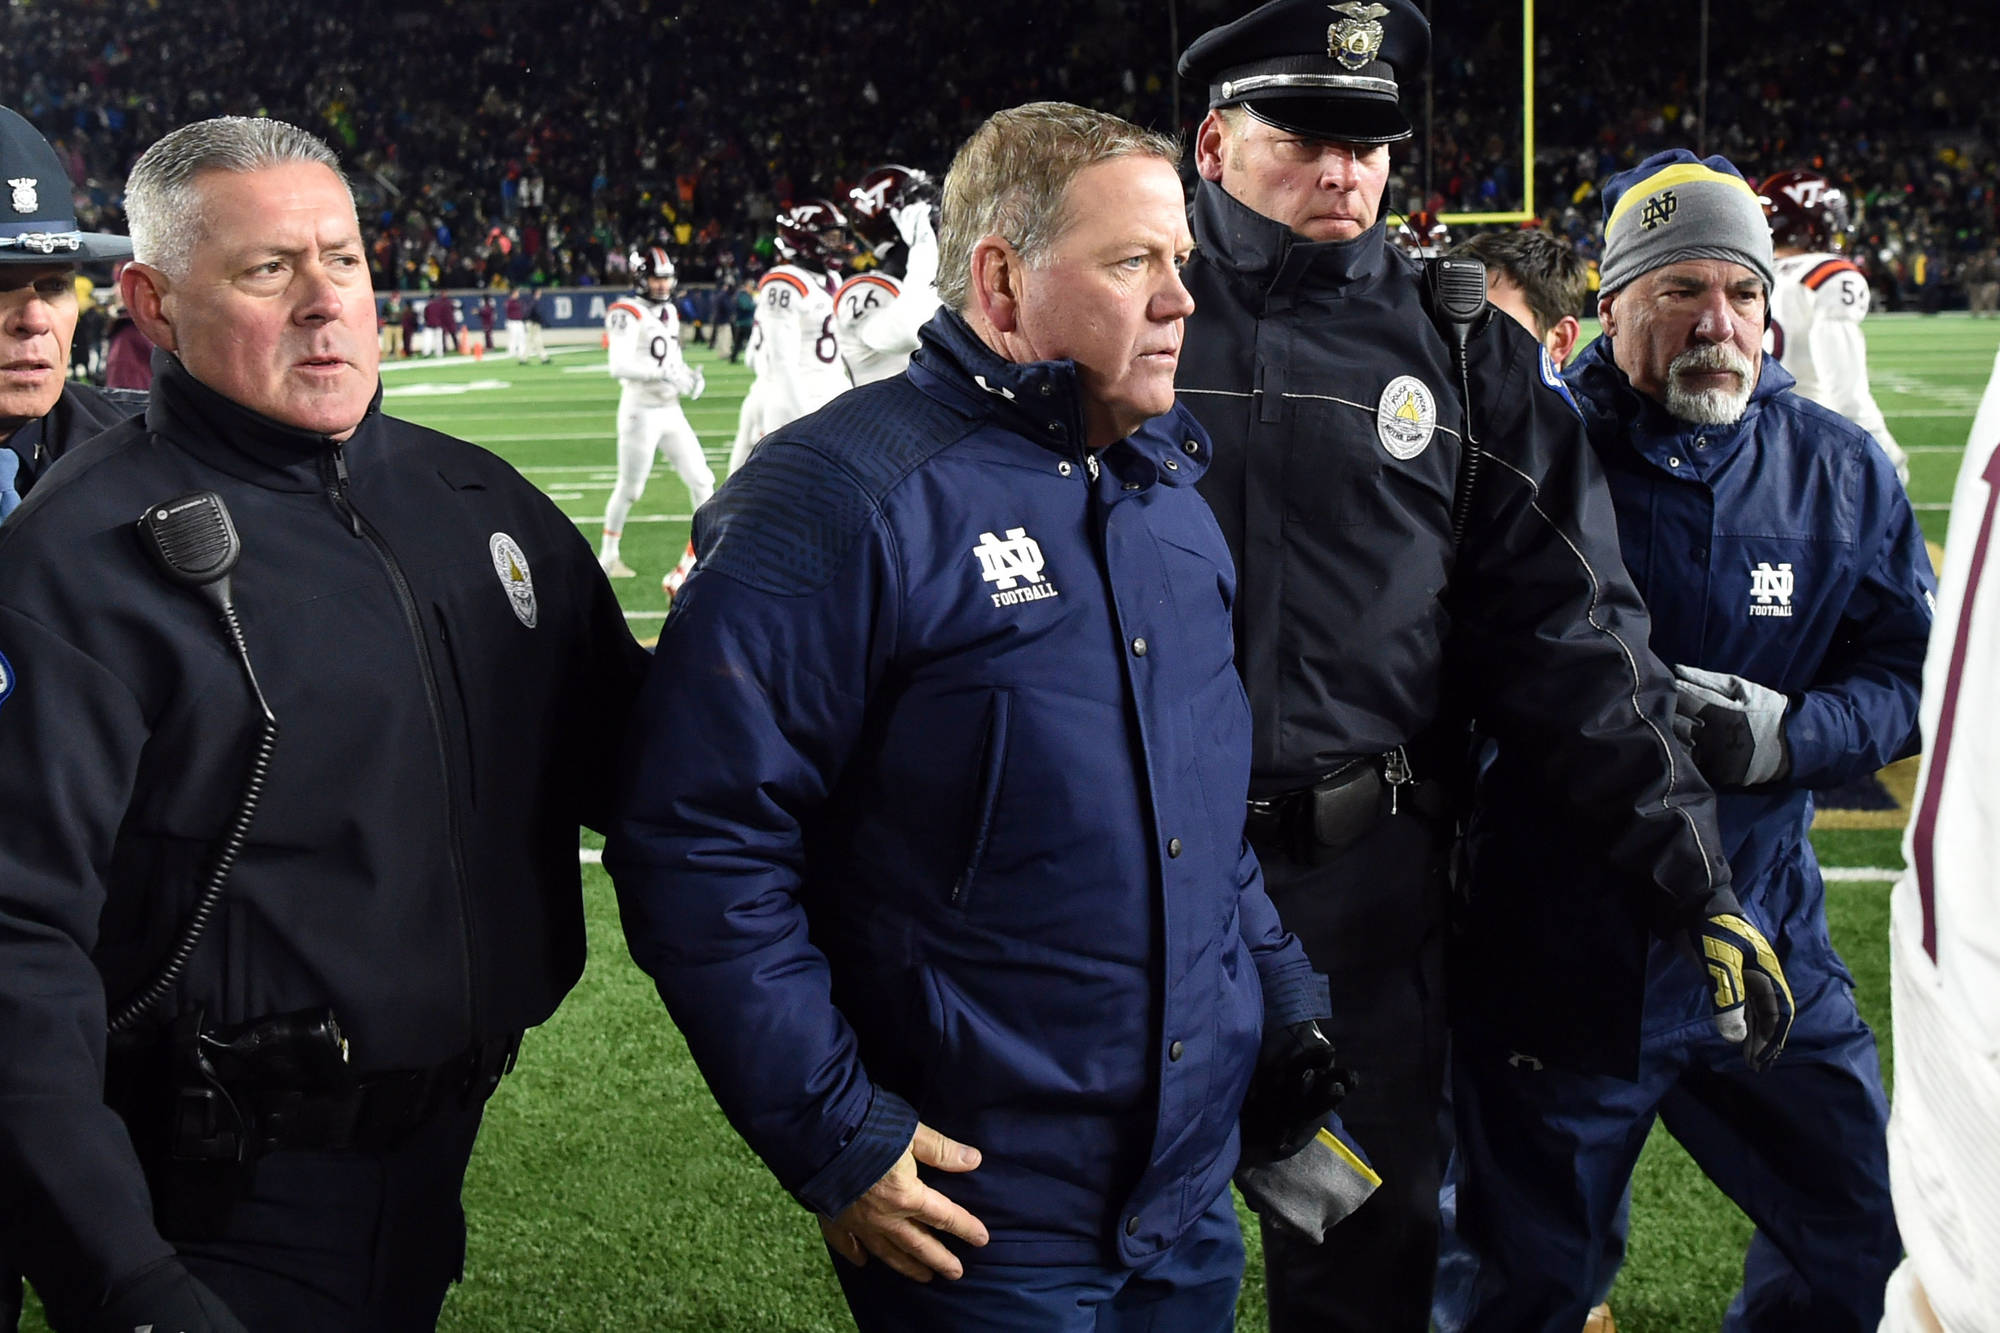 Notre Dame to Forfeit wins